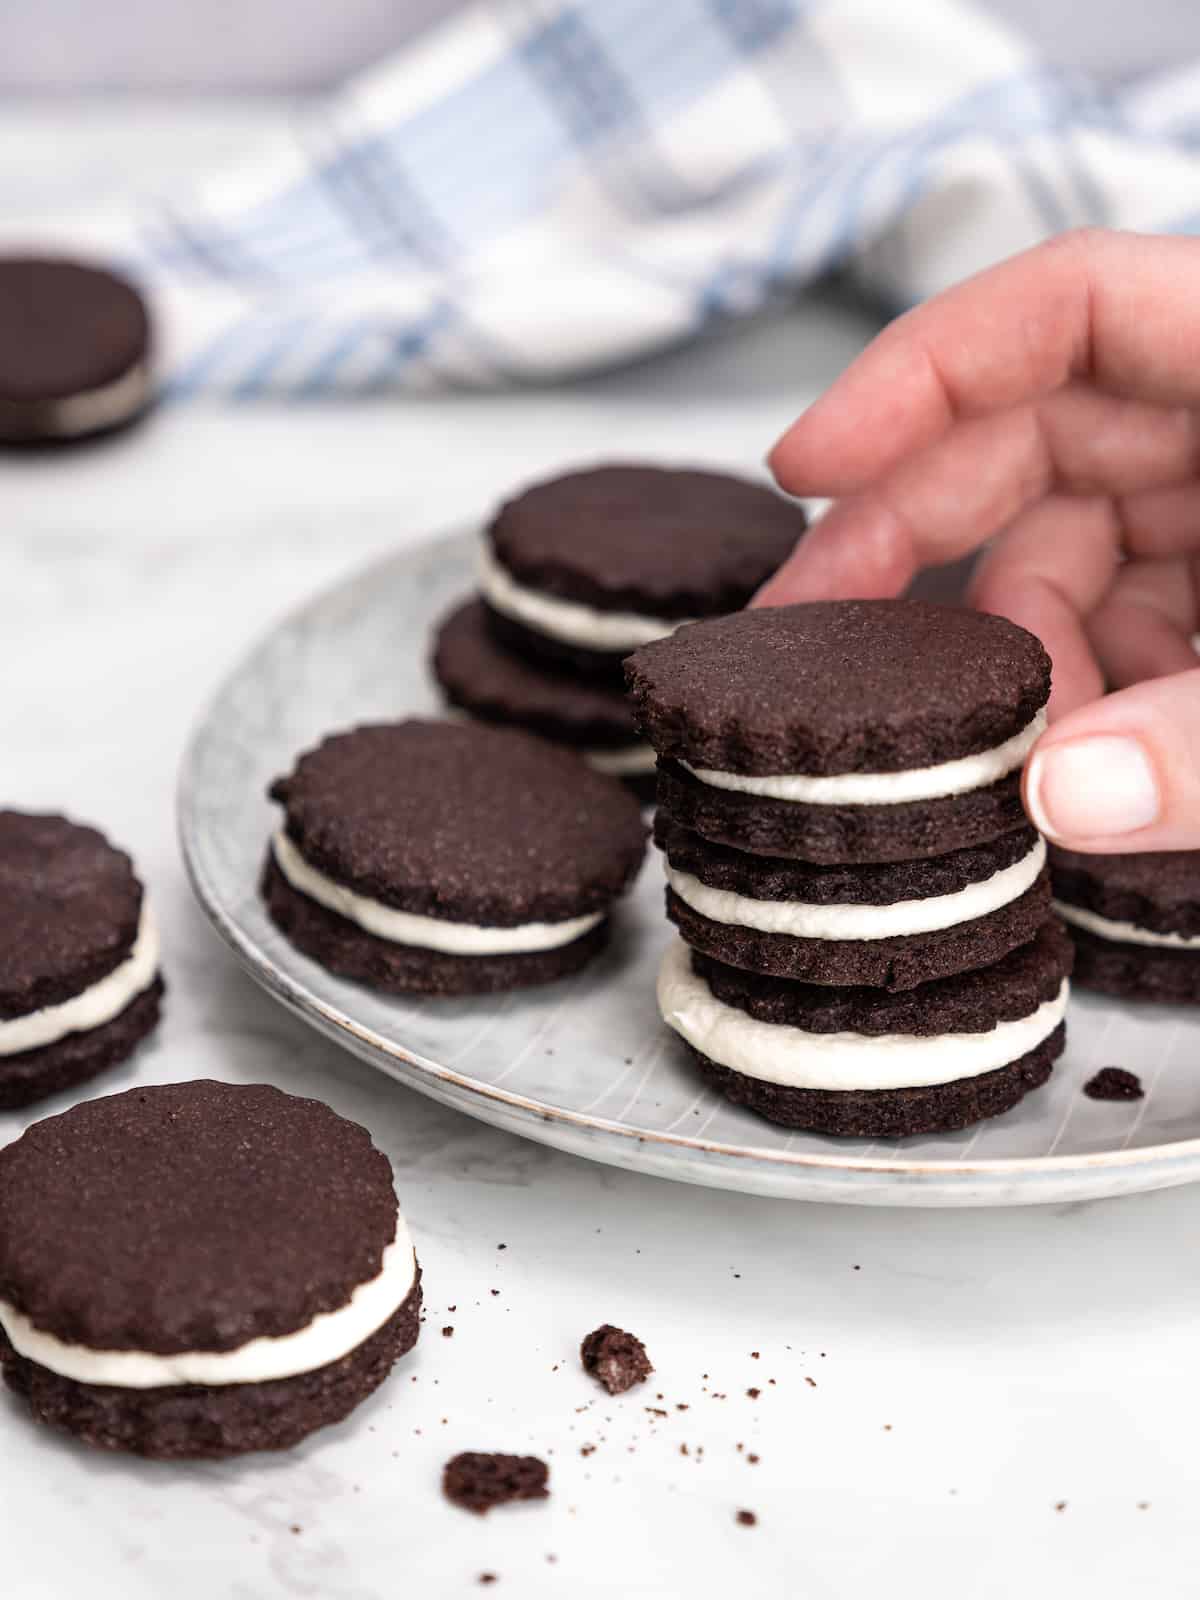 A hand picks up a homemade Oreo from a stack of sandwich cookies on a plate.